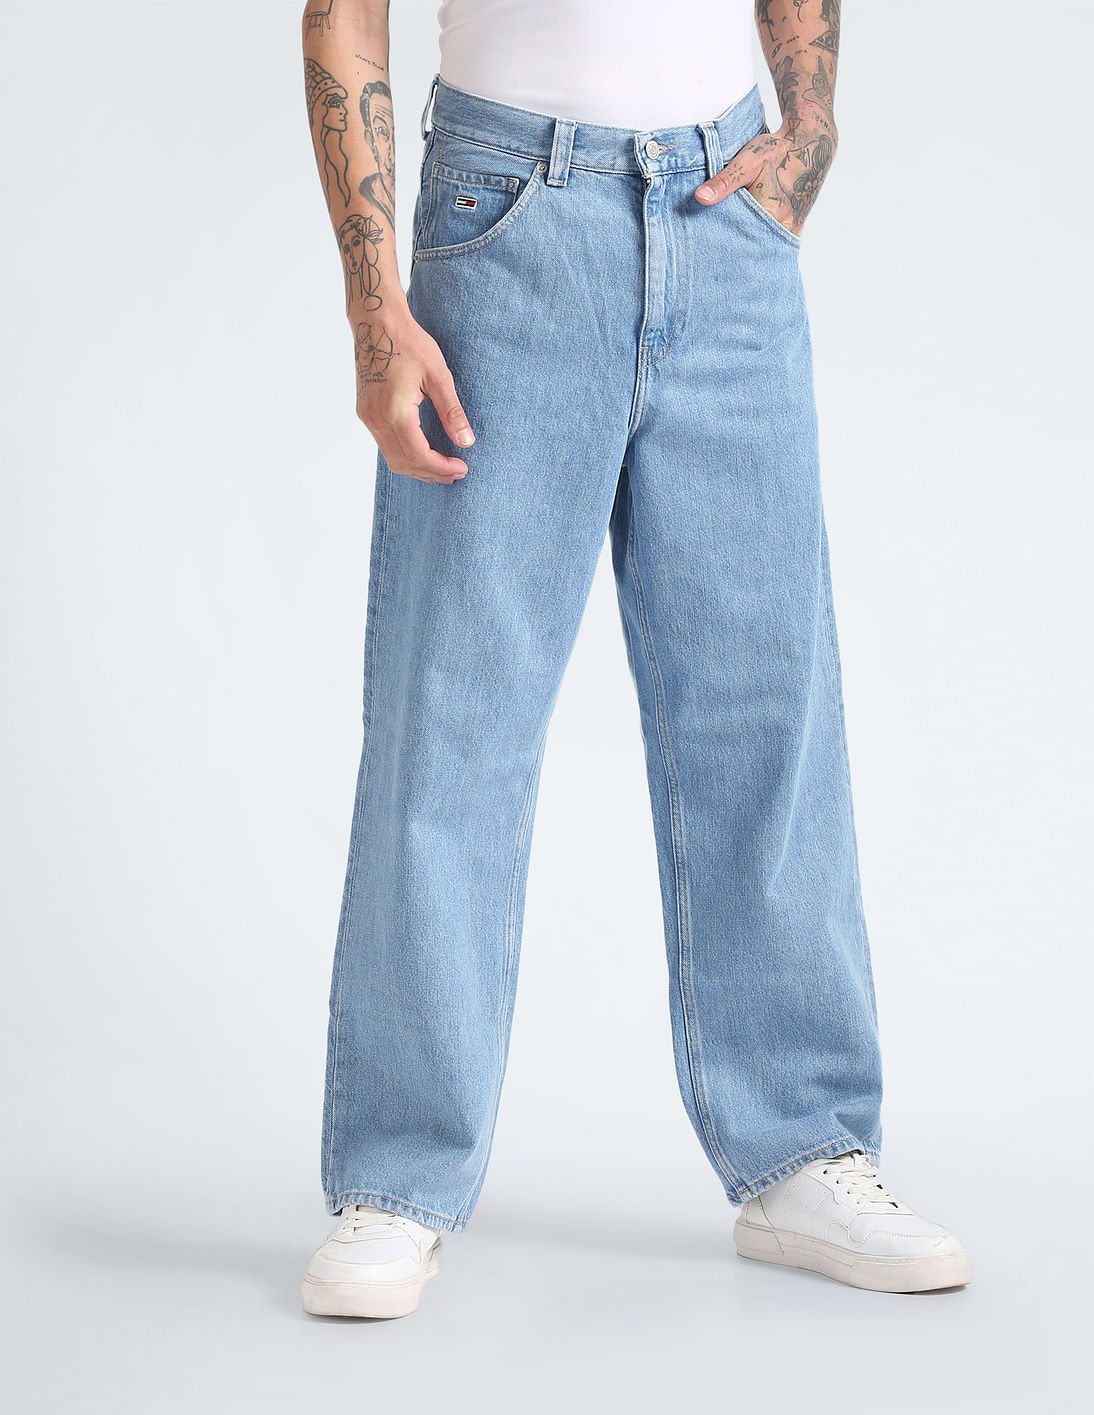 Buy Tommy Hilfiger Sustainable Baggy Fit Jeans - NNNOW.com